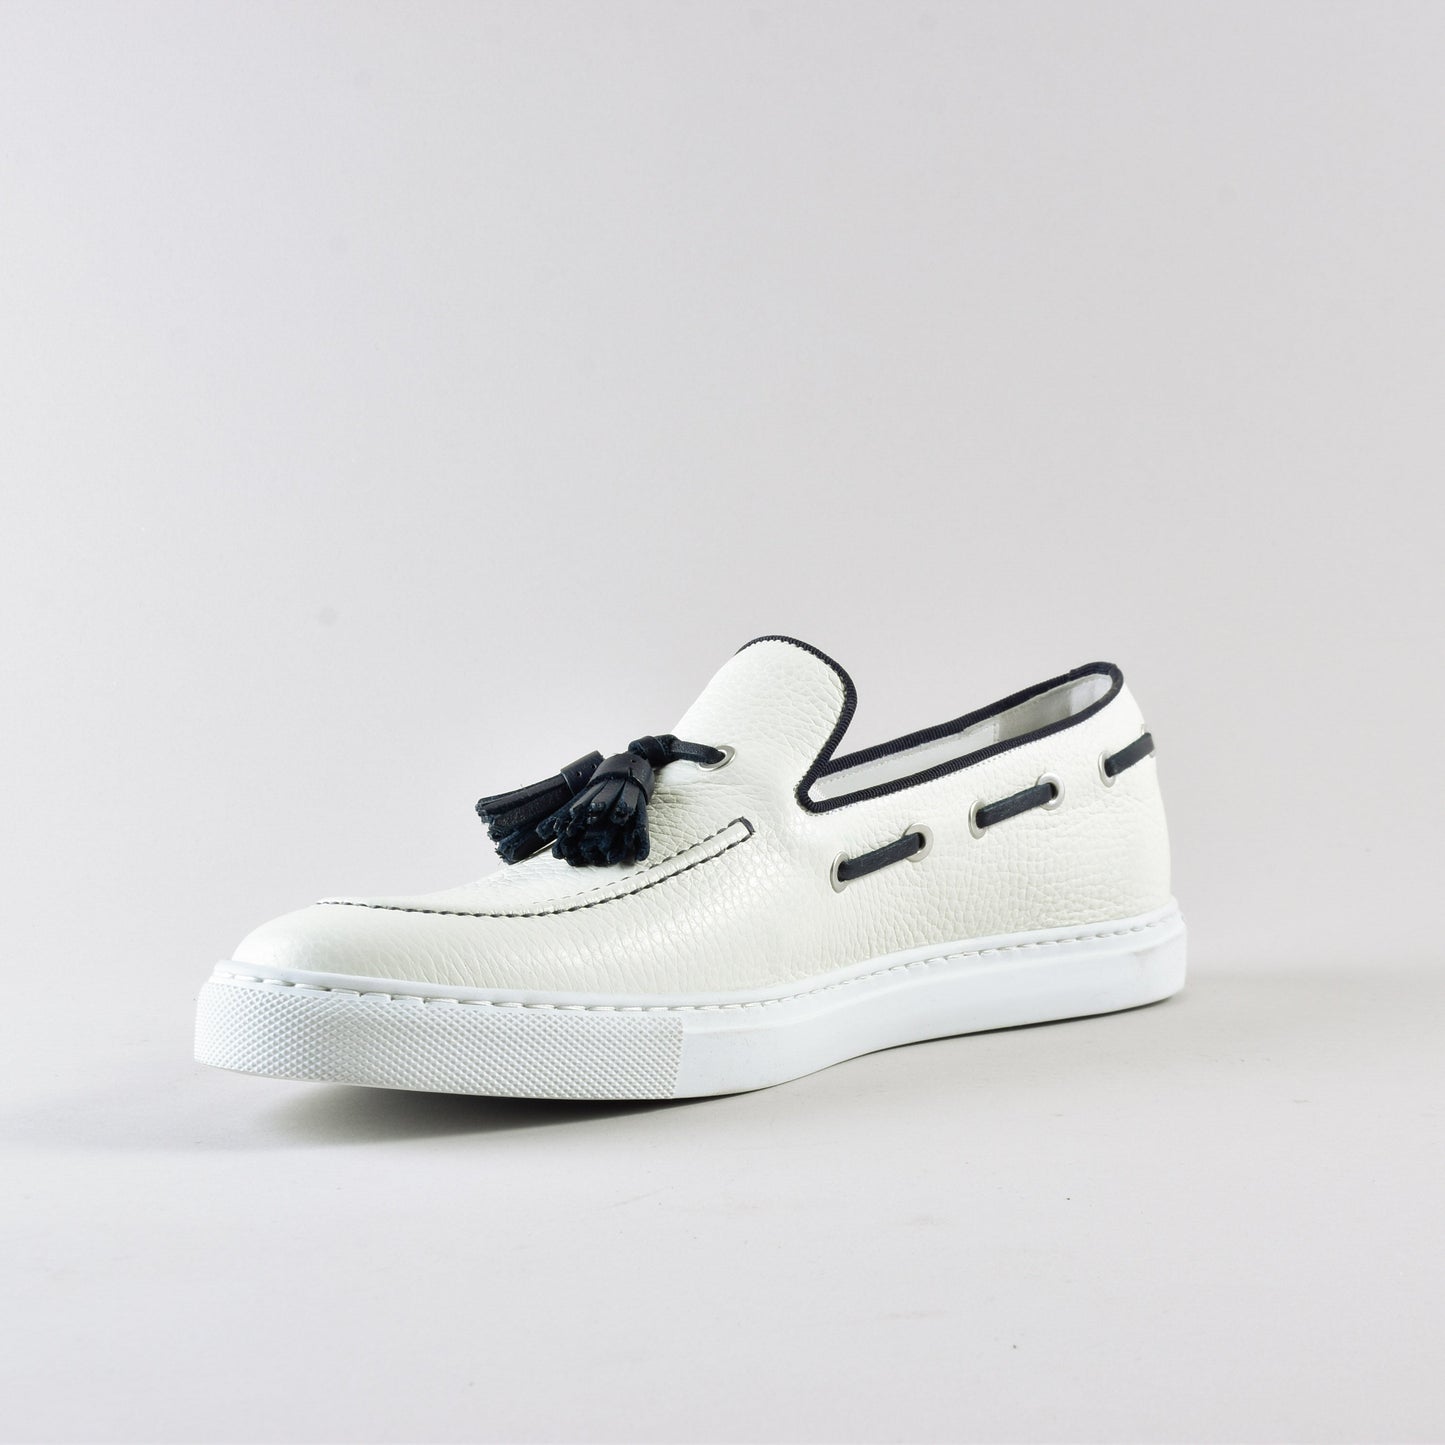 Moccasin sneakers with tassels